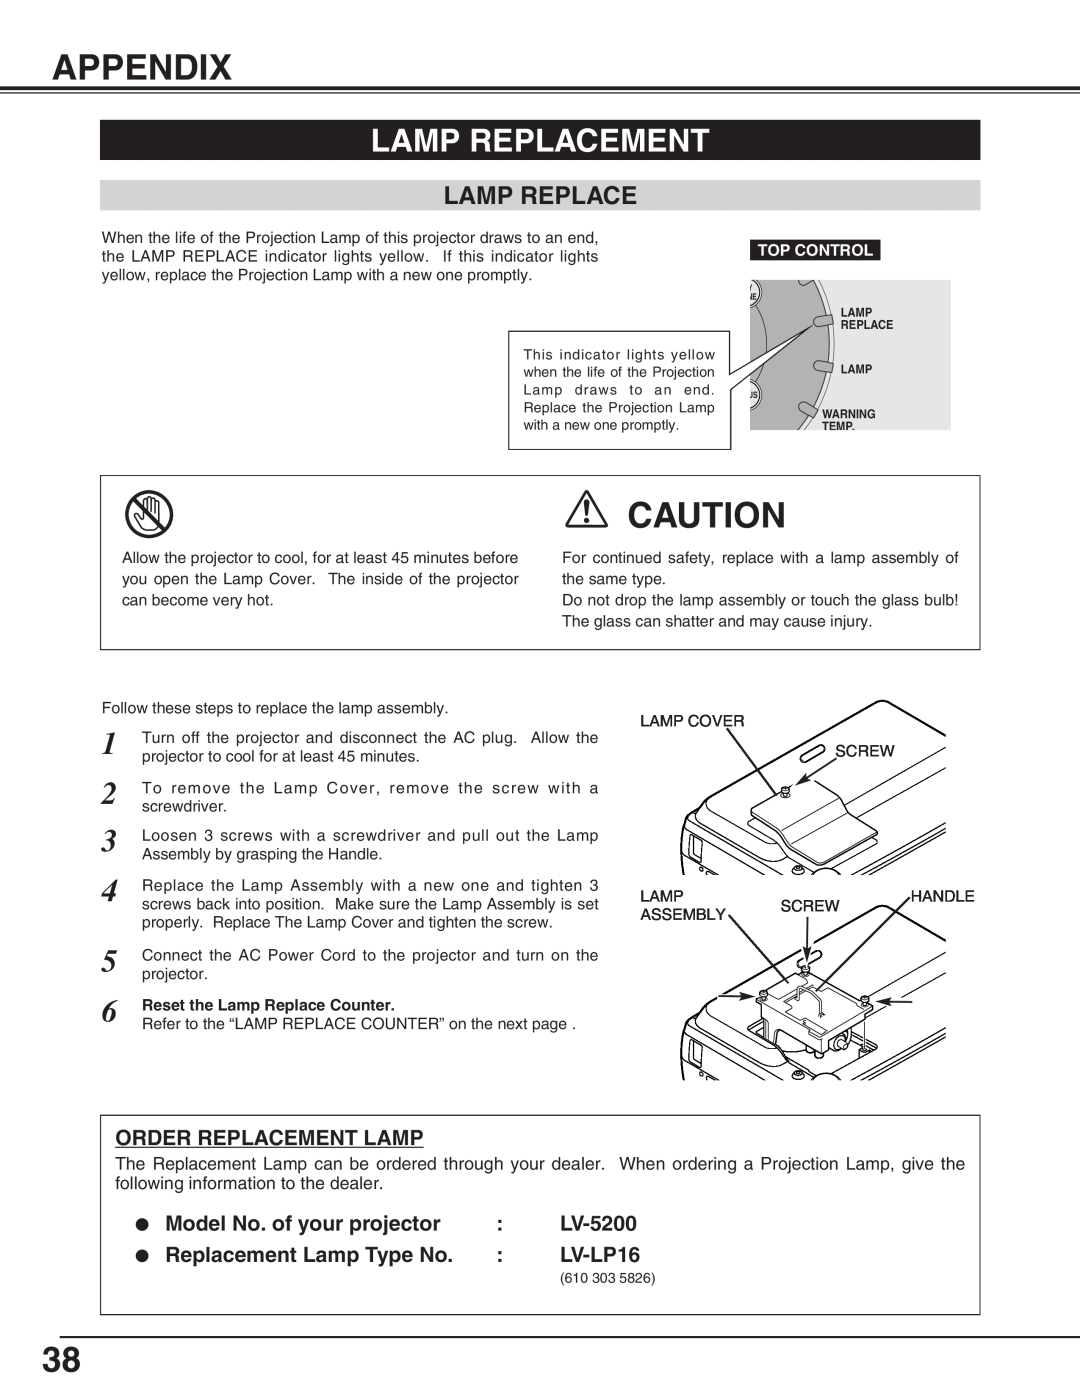 Canon LV-5200 owner manual Appendix, Lamp Replacement, Reset the Lamp Replace Counter 